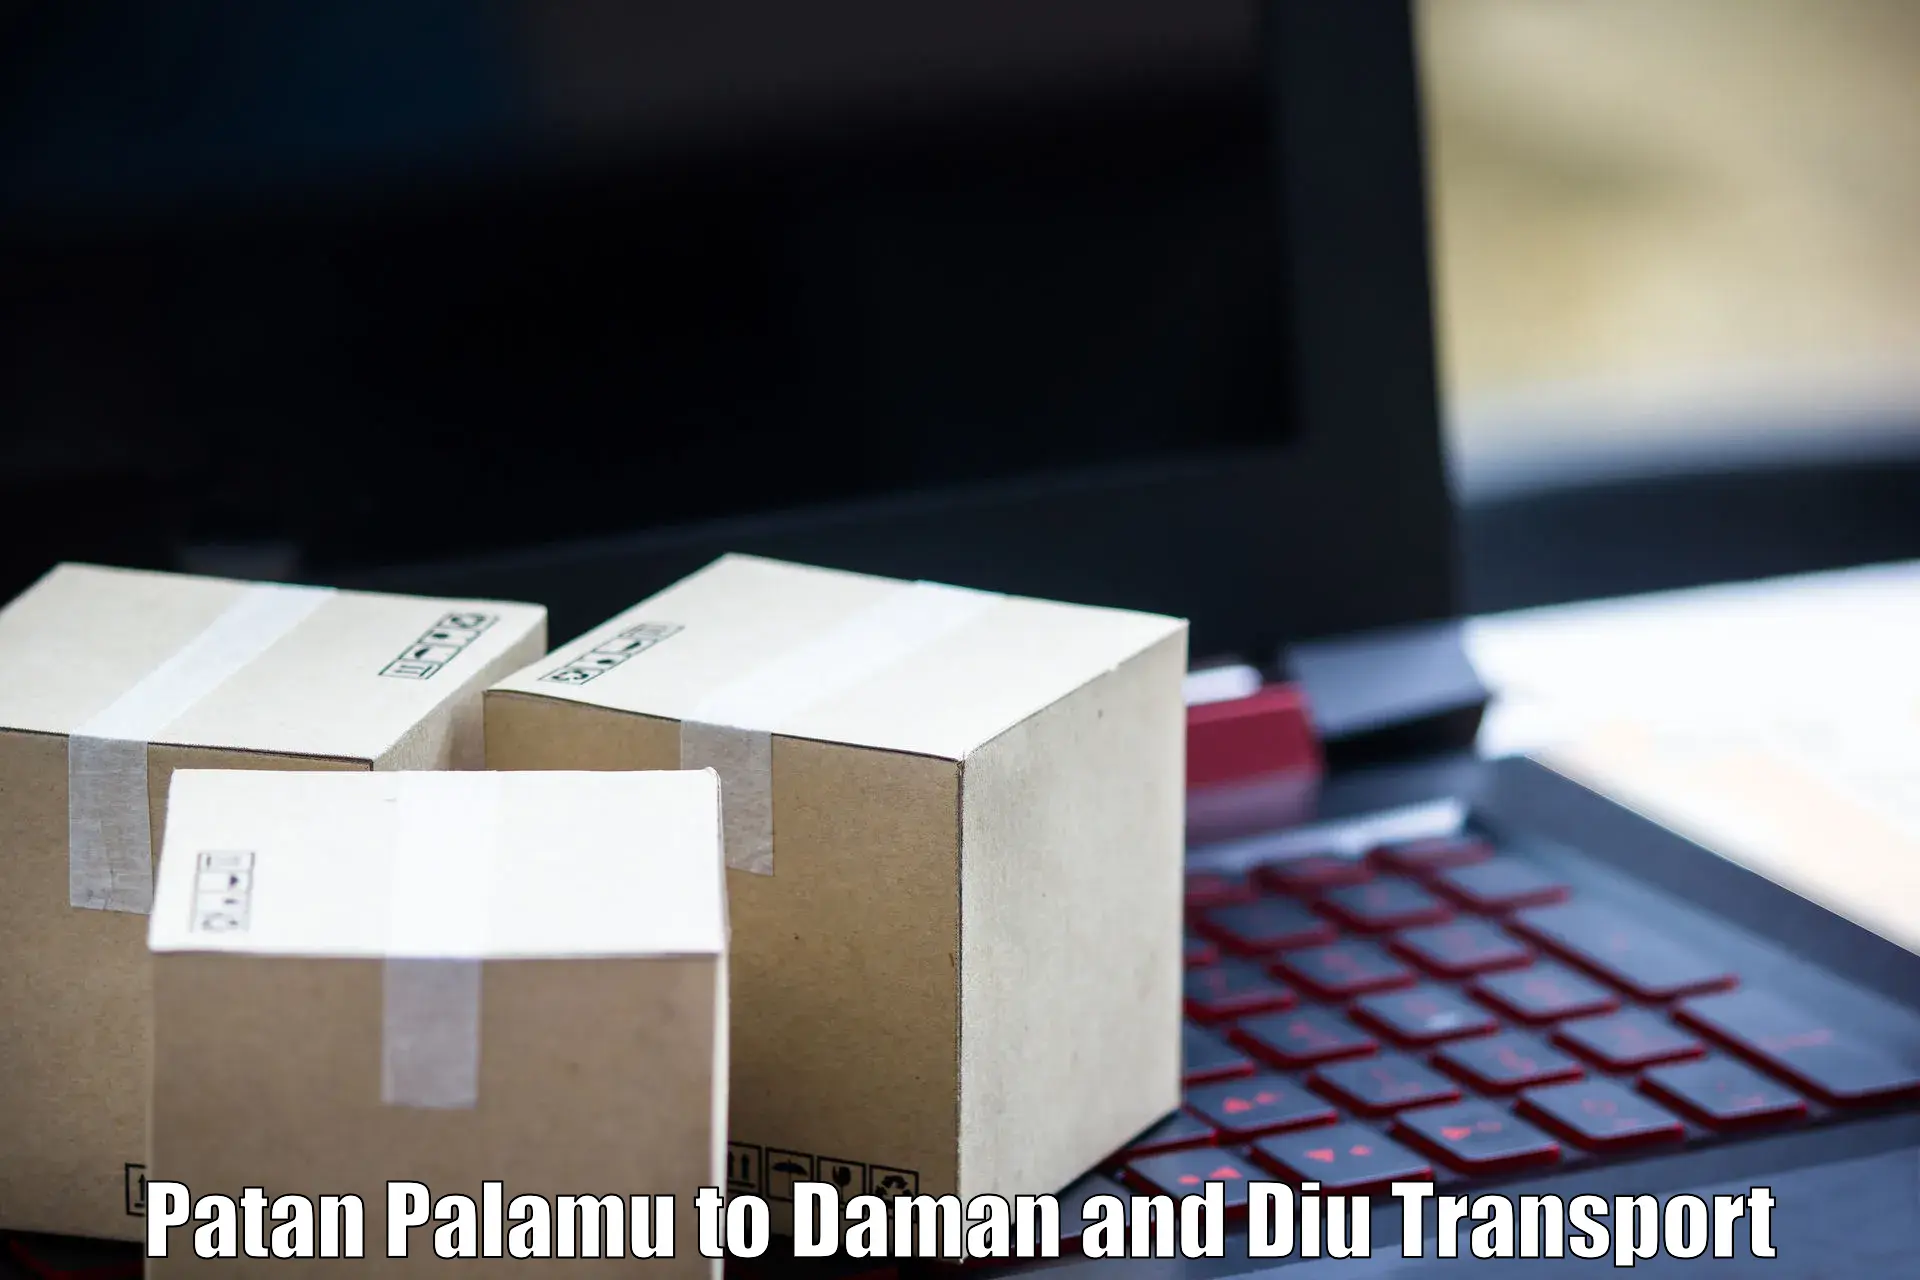 Package delivery services Patan Palamu to Daman and Diu